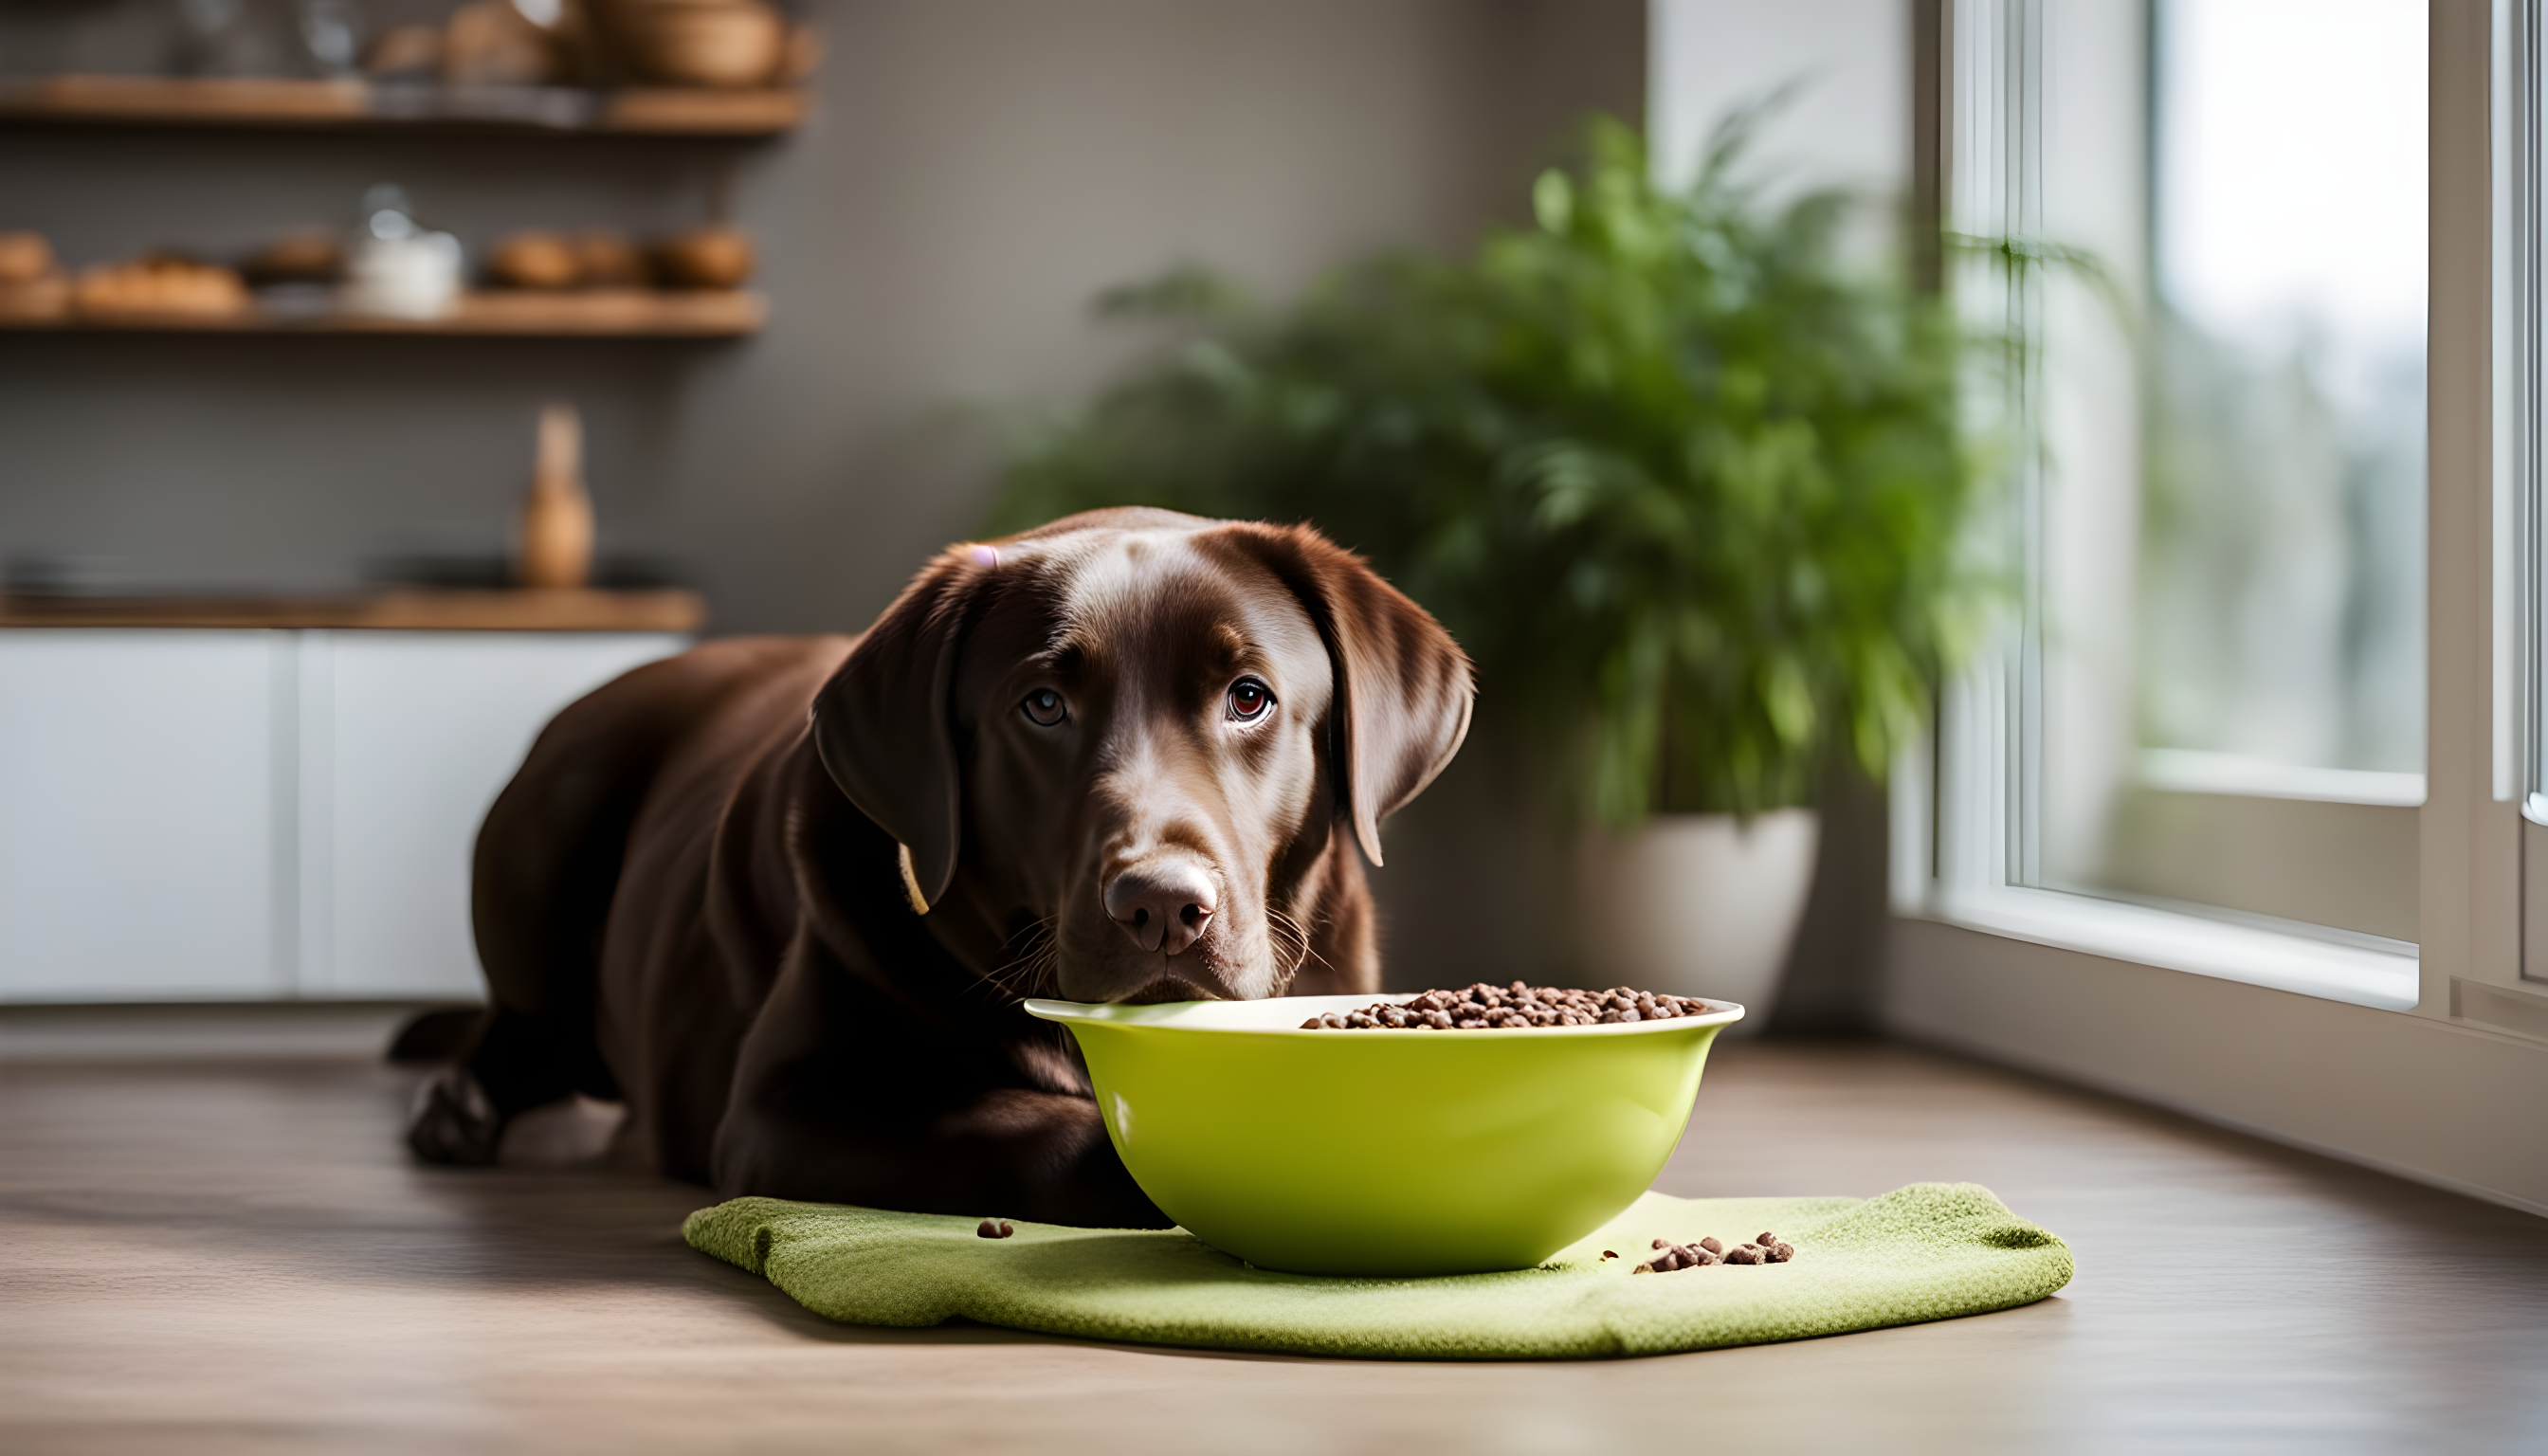 An English Chocolate Lab chowing down a bowl of high-quality kibble, signifying its dietary needs